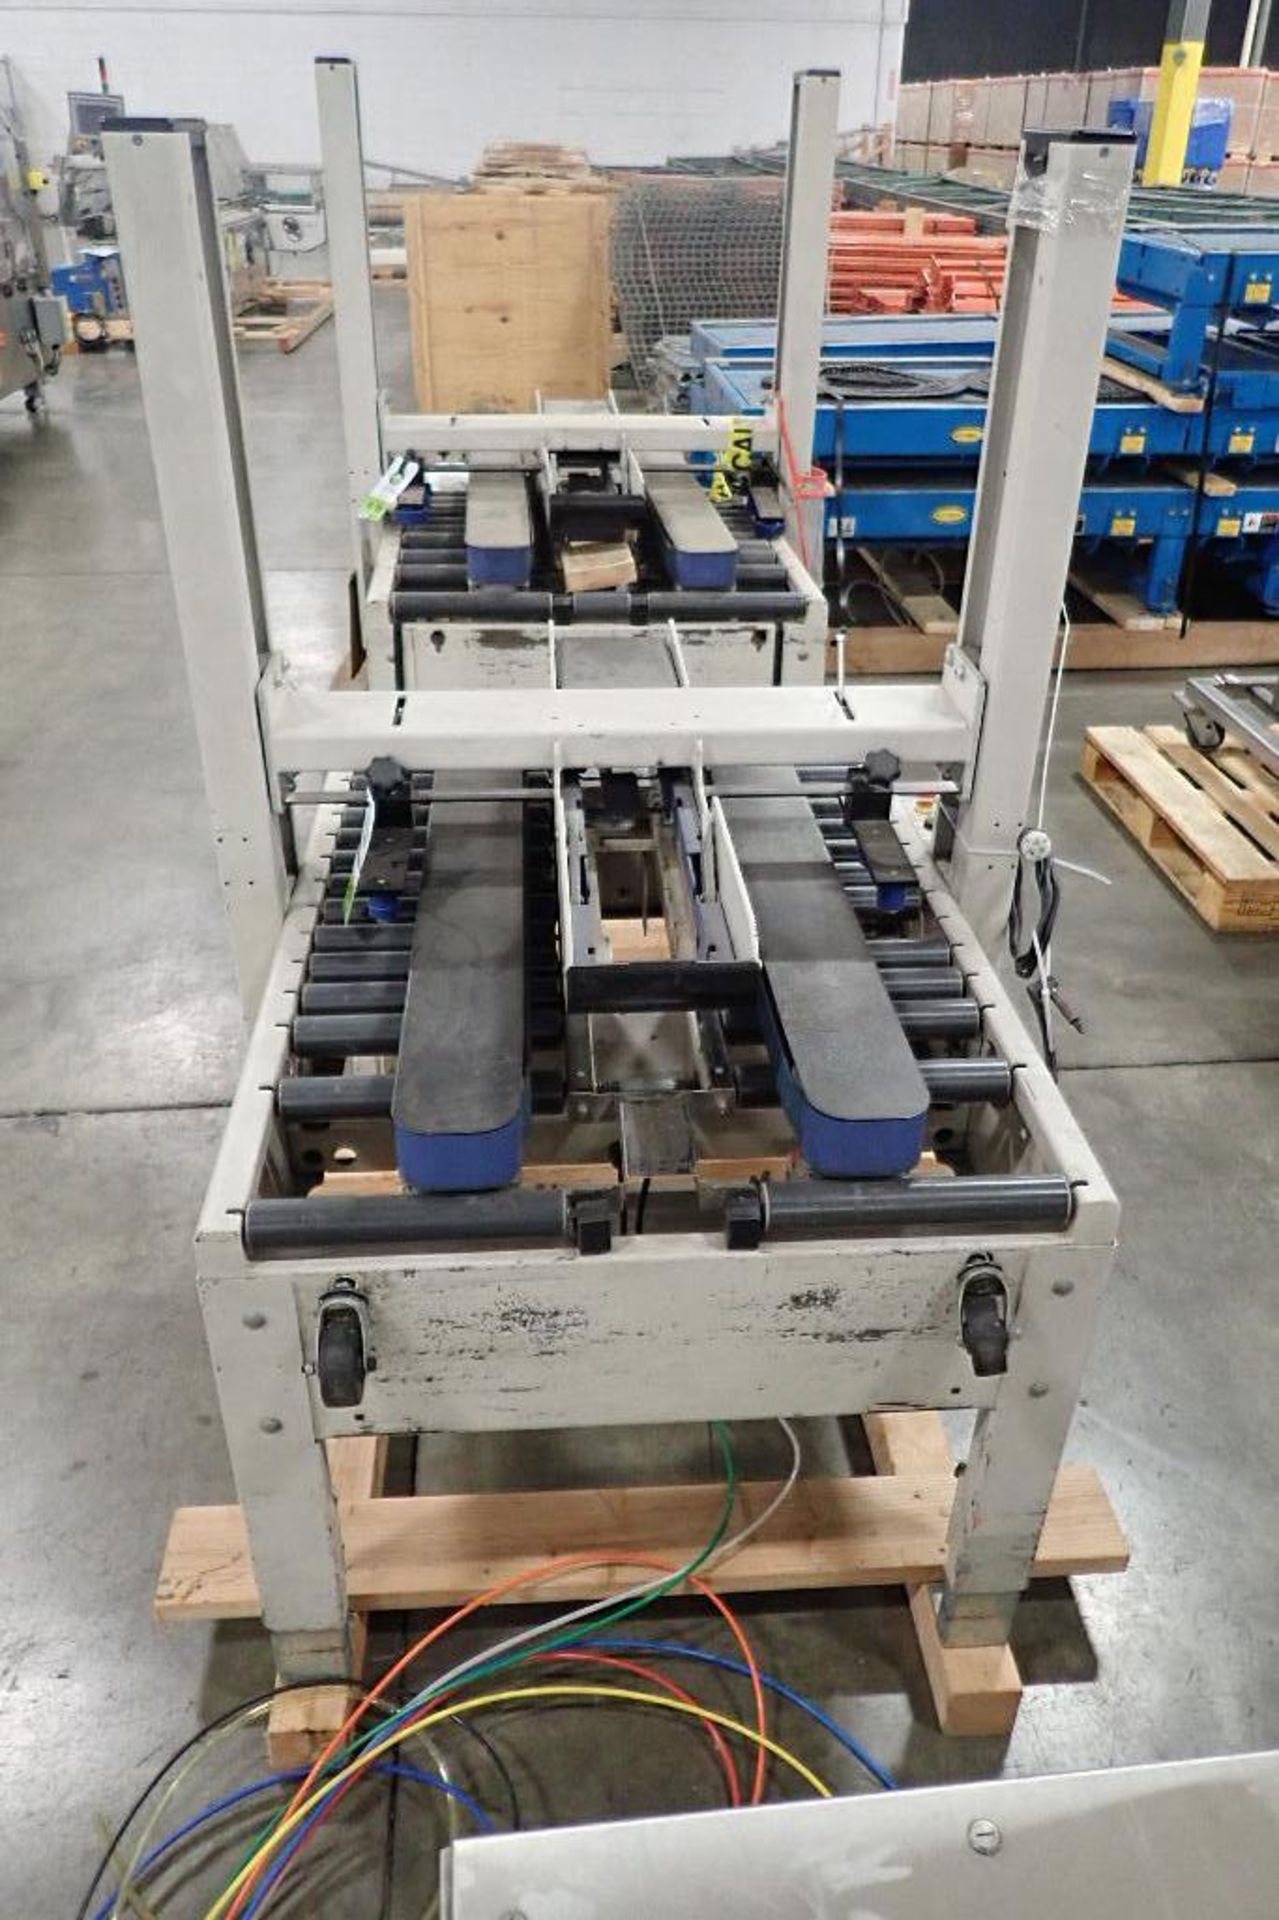 Interpack adjustable case sealer, Model USA2024SB, missing heads. **Rigging Fee: $50** (Located in 3 - Image 2 of 8